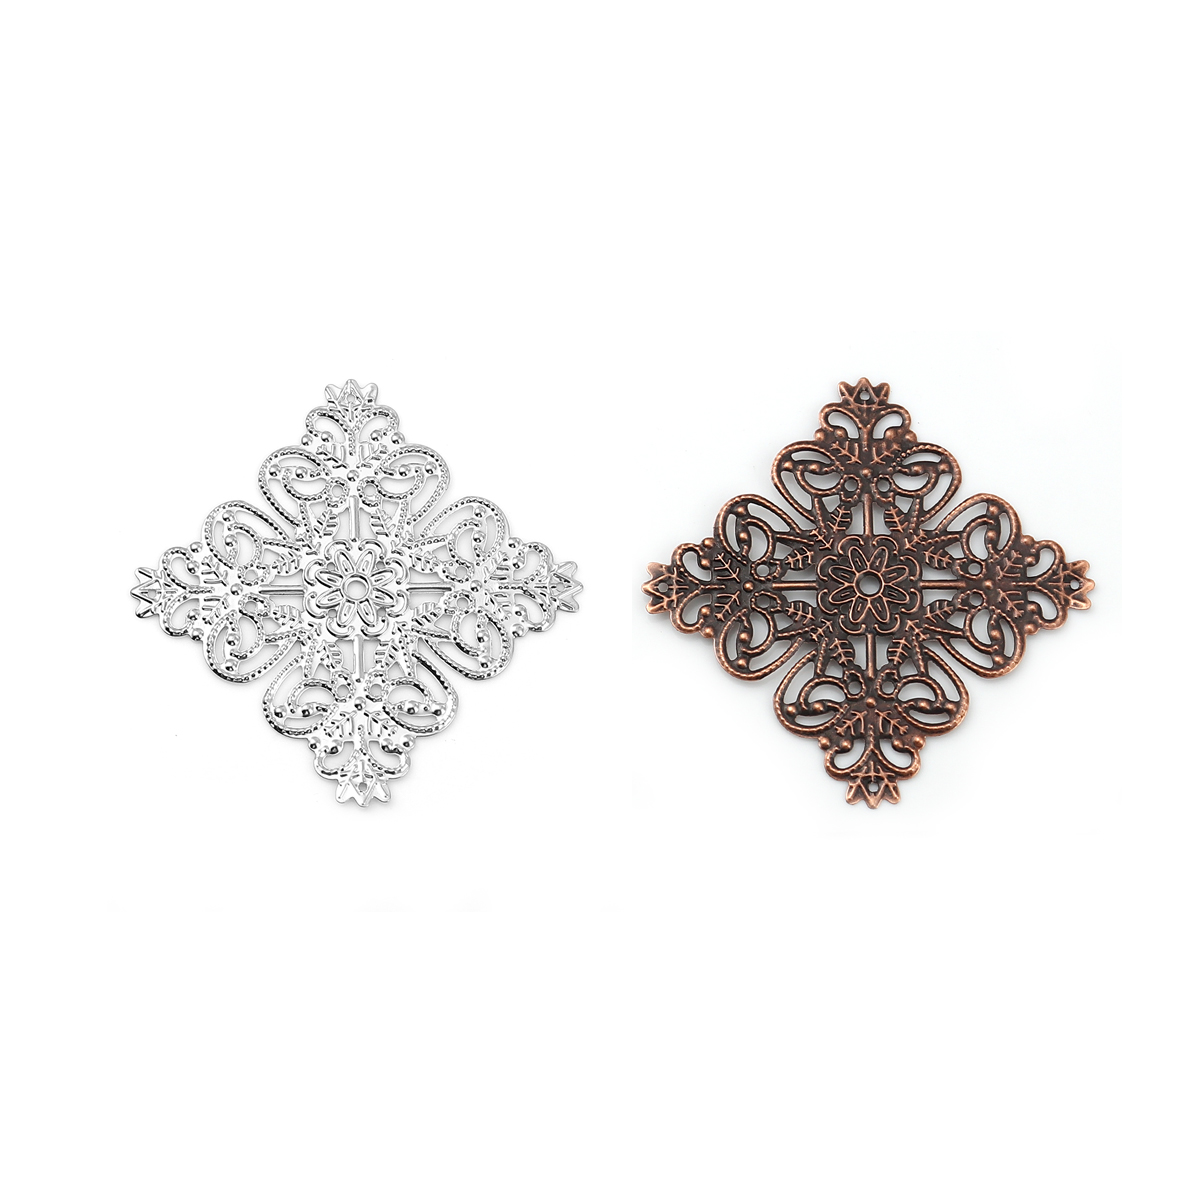 Picture of Iron Based Alloy Filigree Stamping Embellishments Square Silver Tone 56mm(2 2/8") x 56mm(2 2/8"), 30 PCs